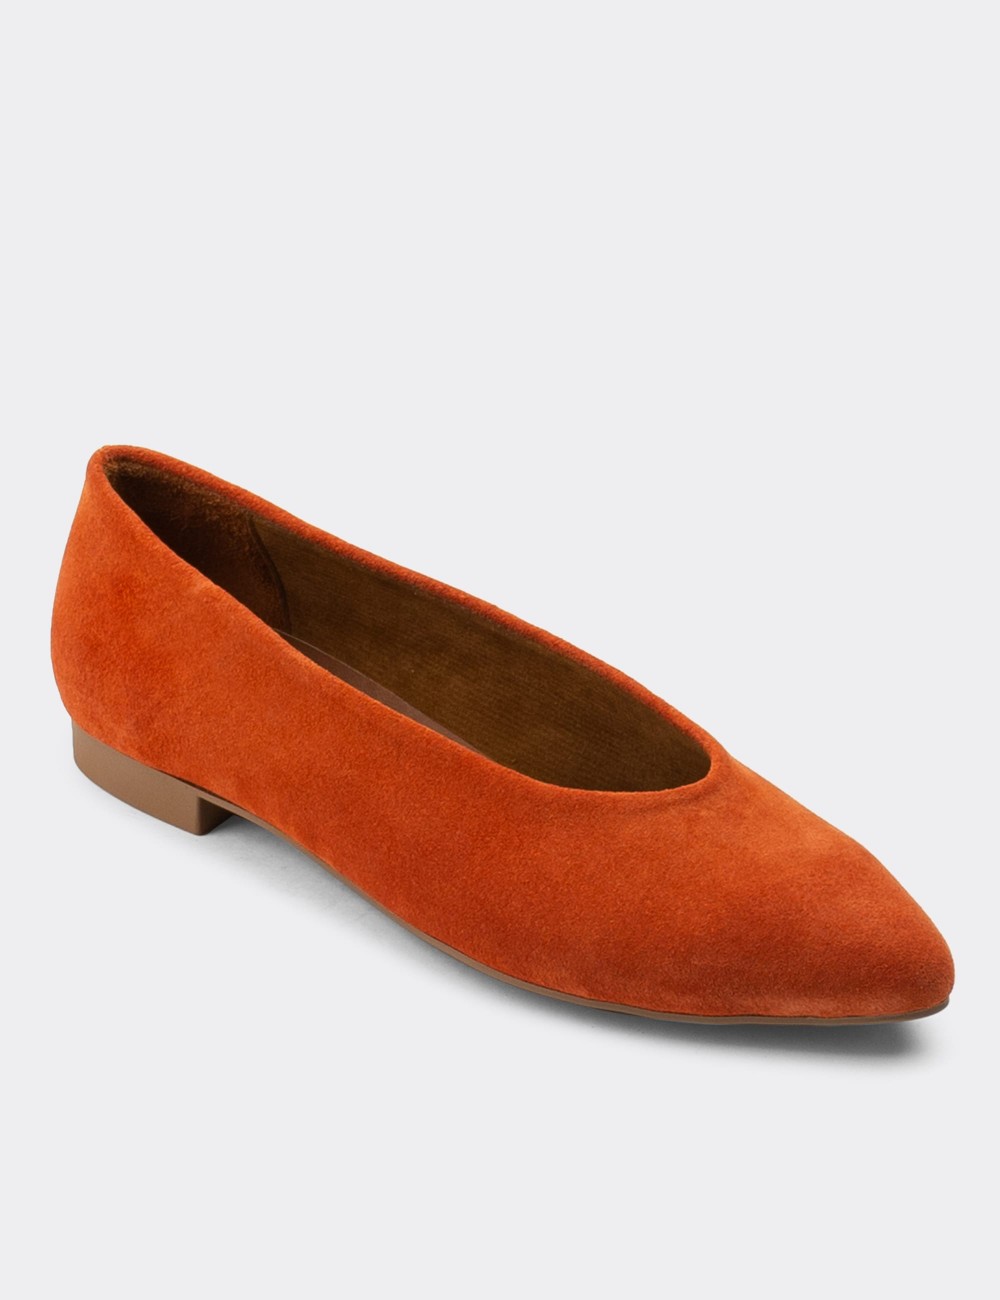 Orange Suede Leather Loafers - 01896ZTRCC01